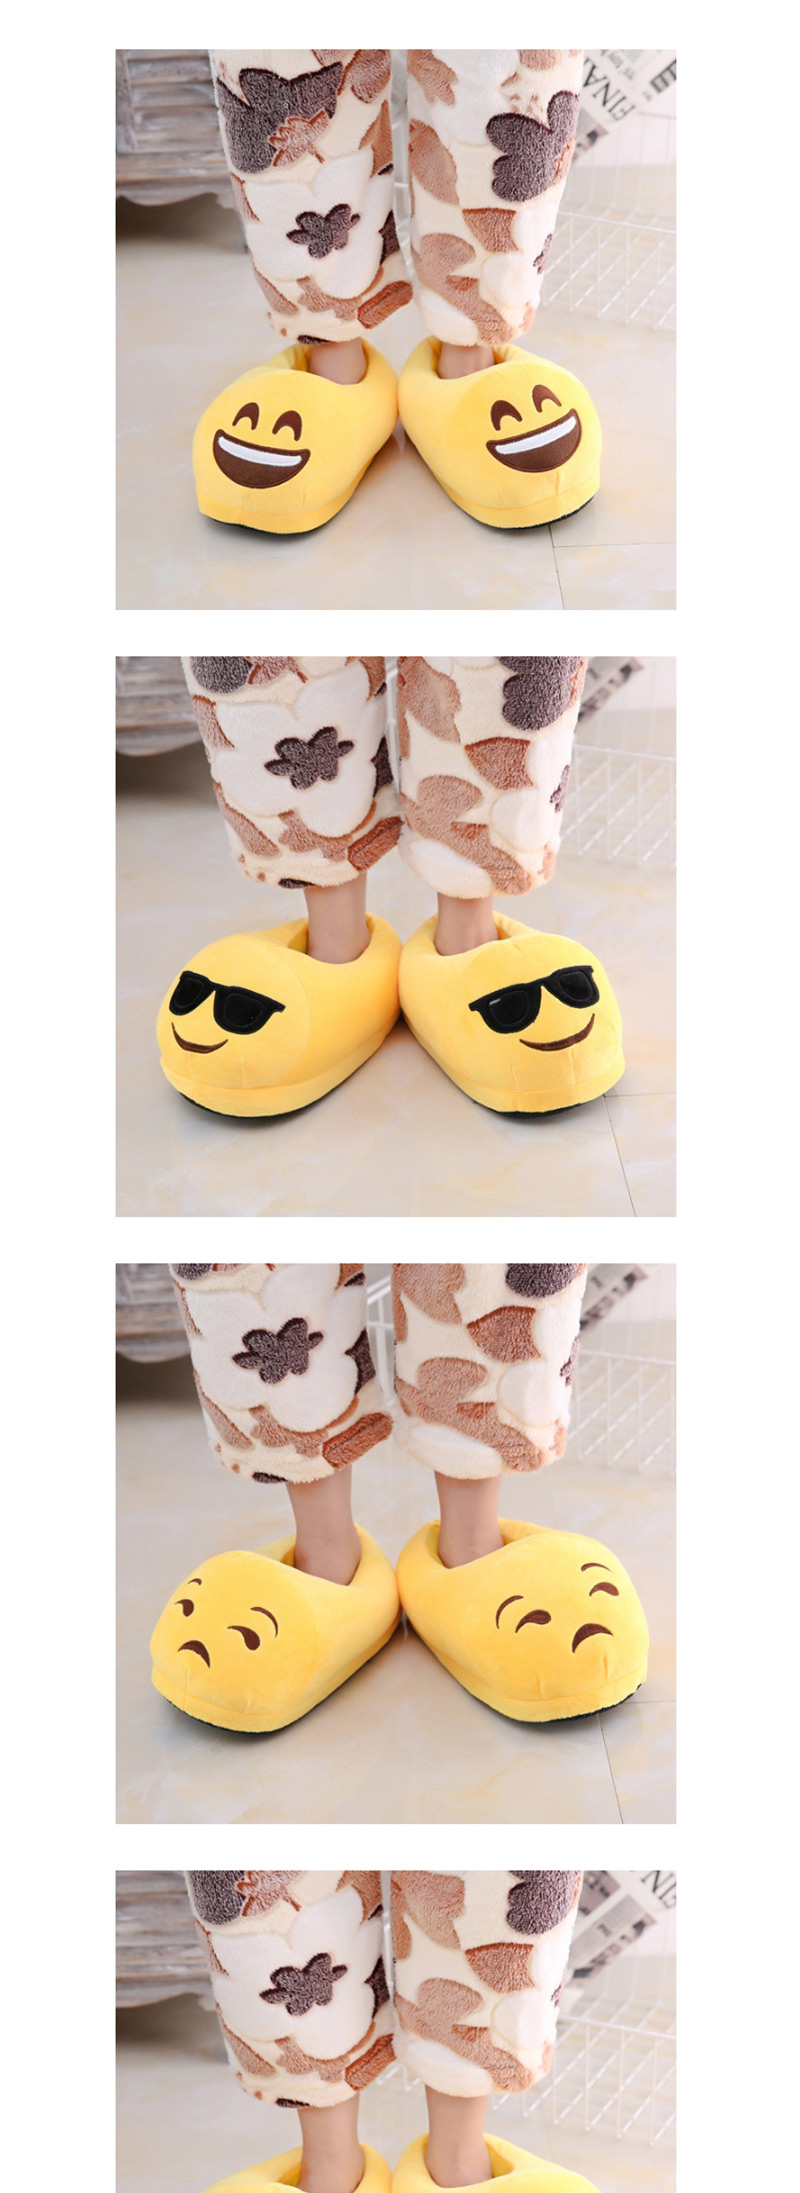 Fashion 2 Yellow Love Cartoon Expression Plush Bag With Cotton Slippers,Slippers